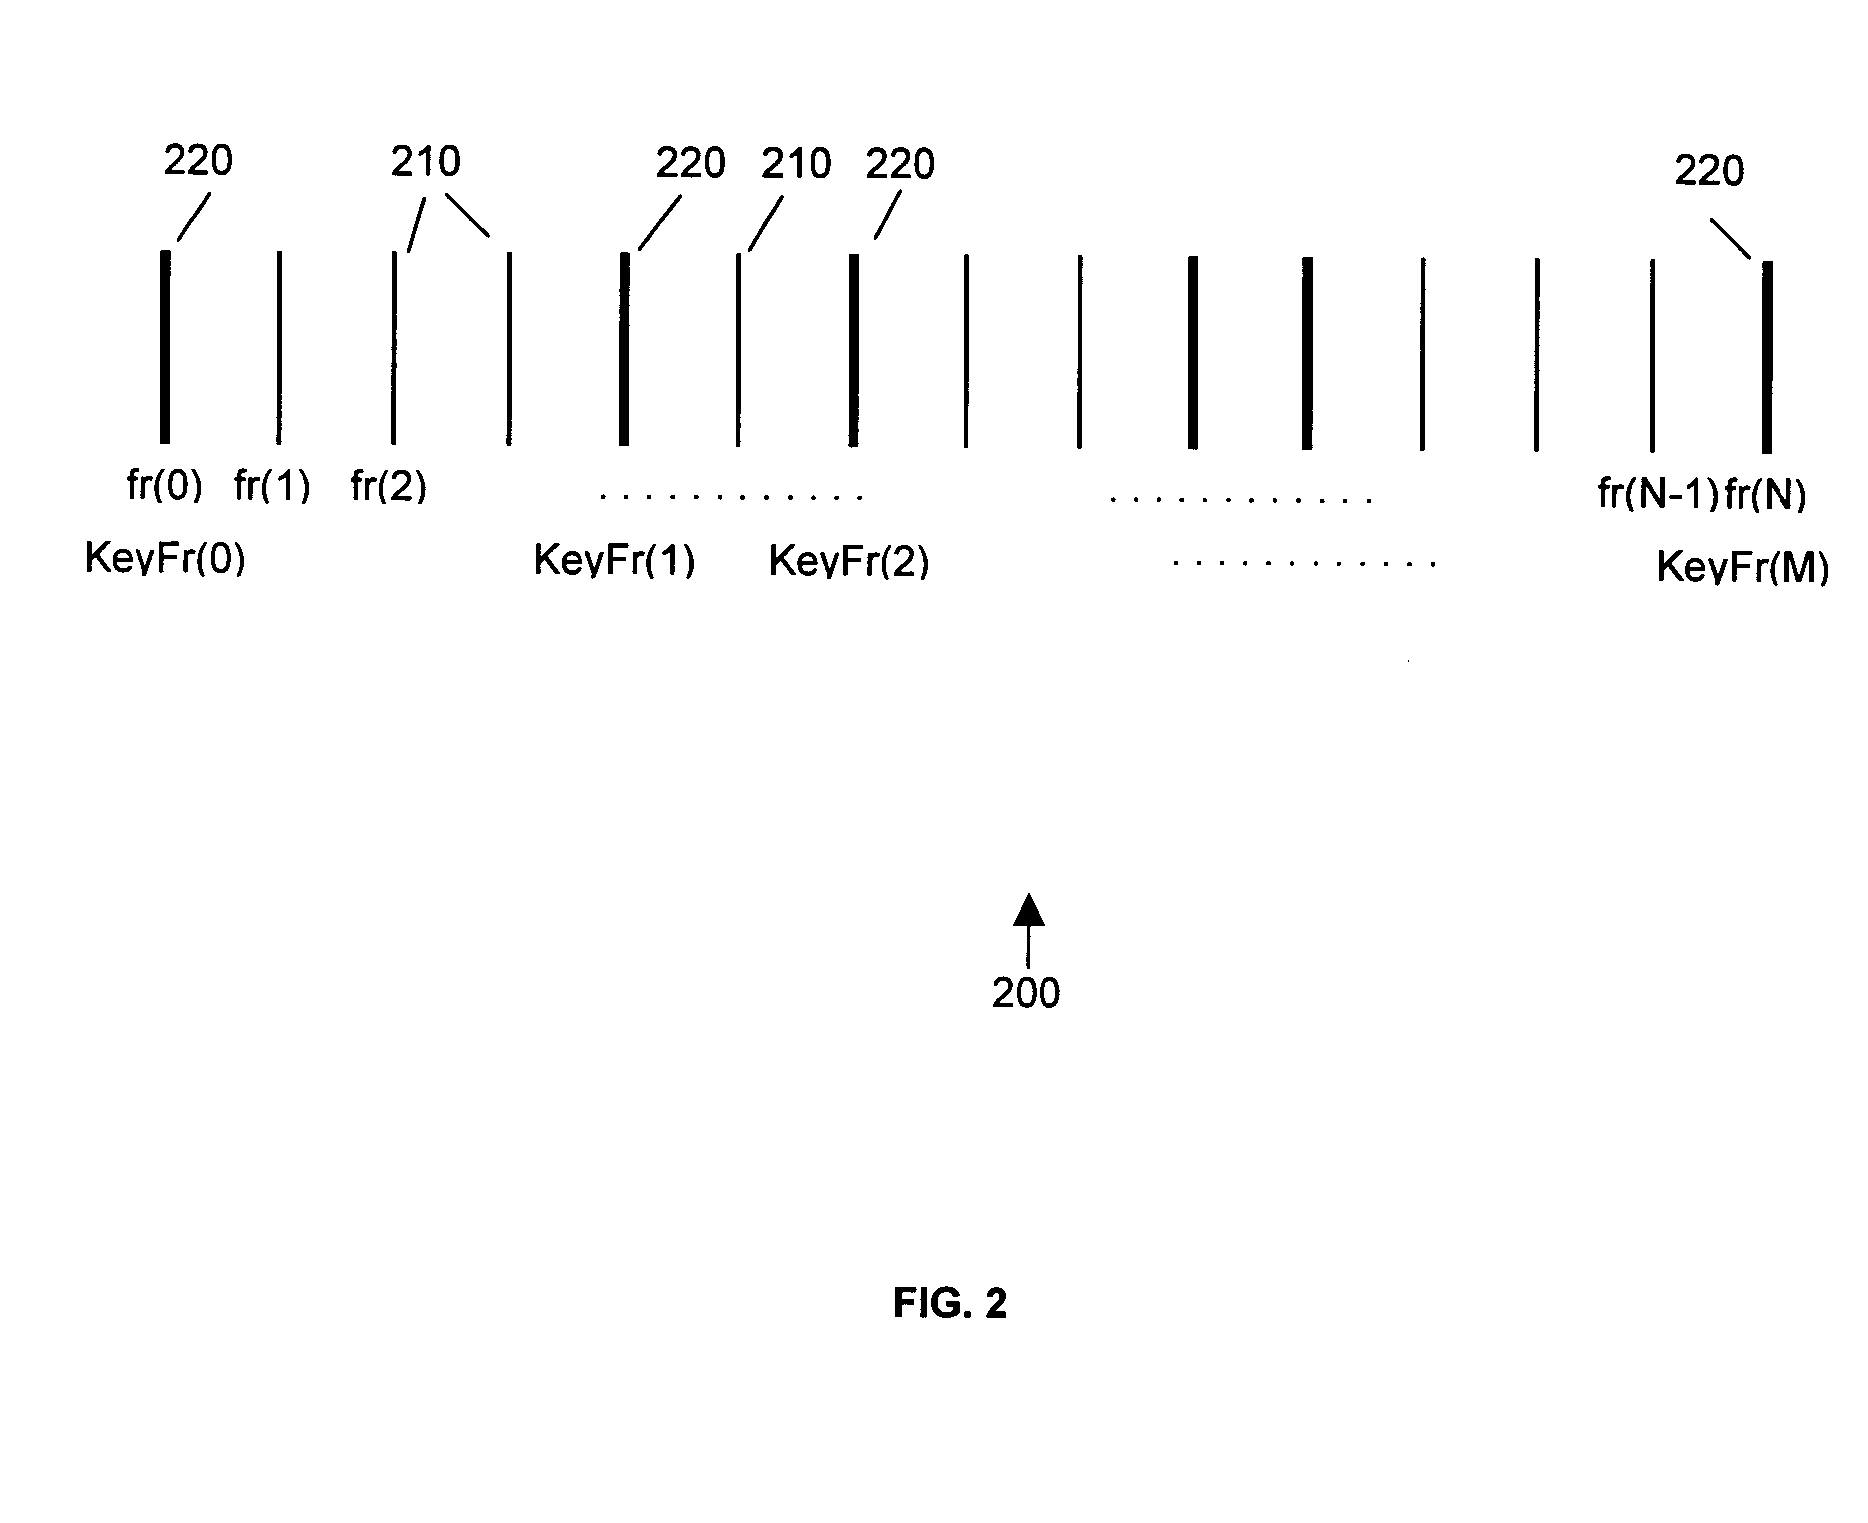 Apparatus and method for detecting opaque logos within digital video signals